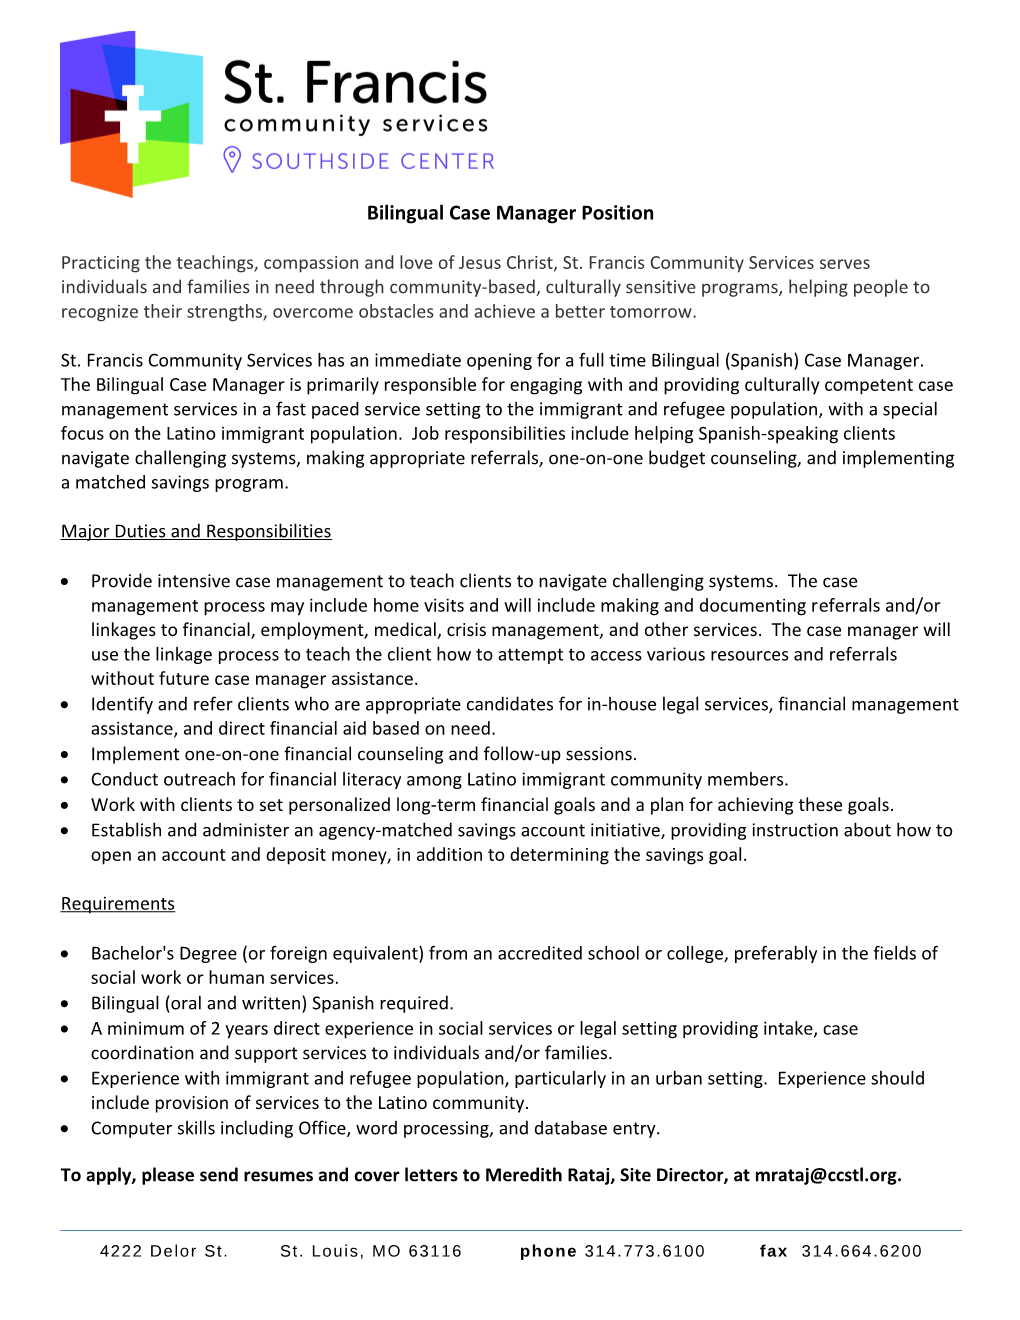 Bilingual Case Manager Position